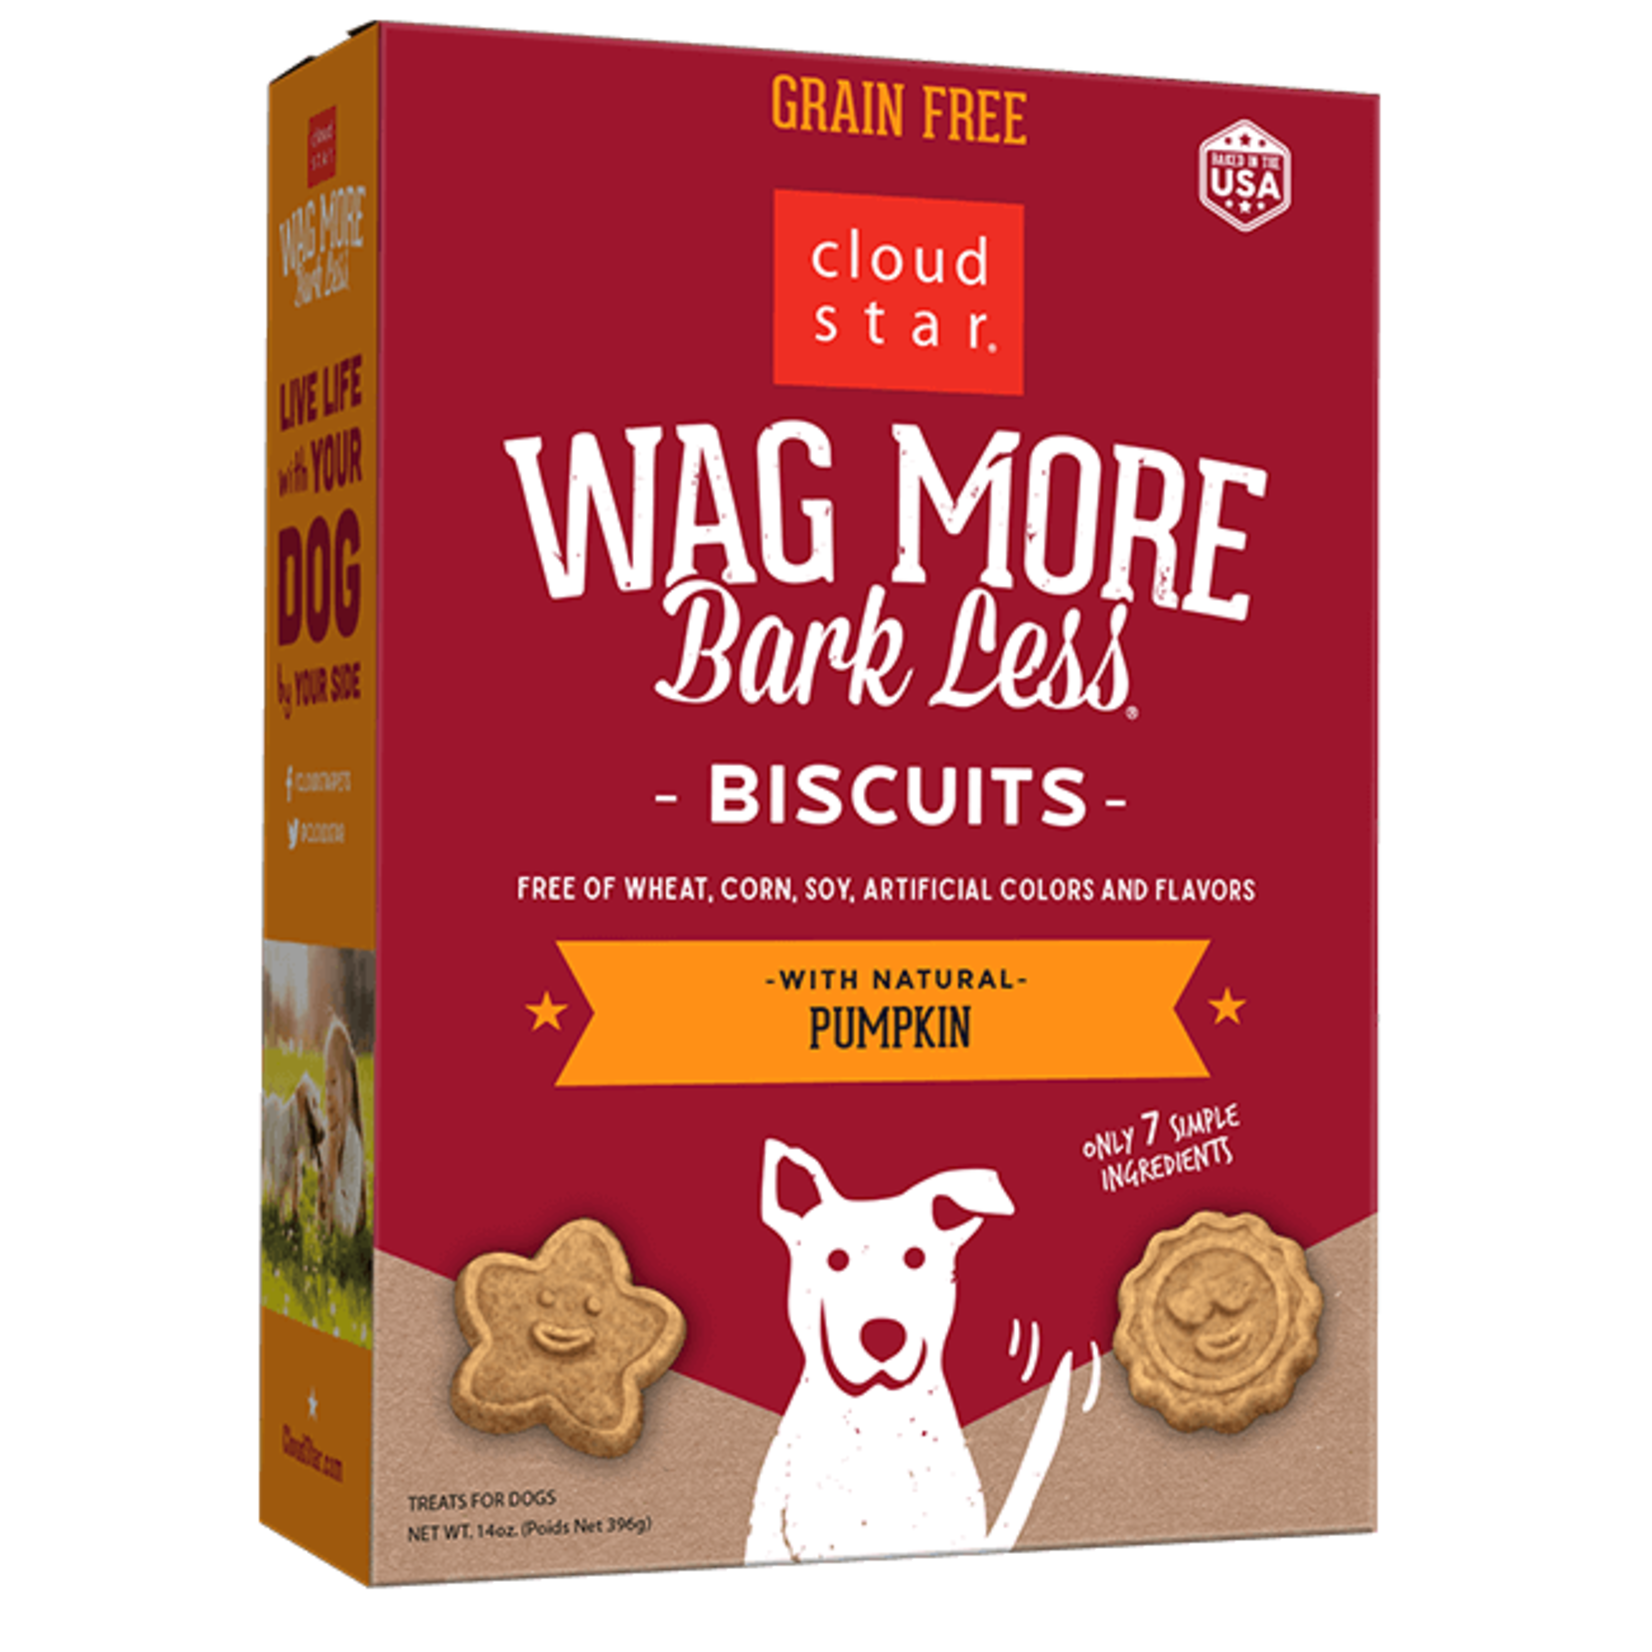 Cloud Star Wag More Bark Less Grain Free Oven Baked Dog Biscuits with Pumpkin 14oz